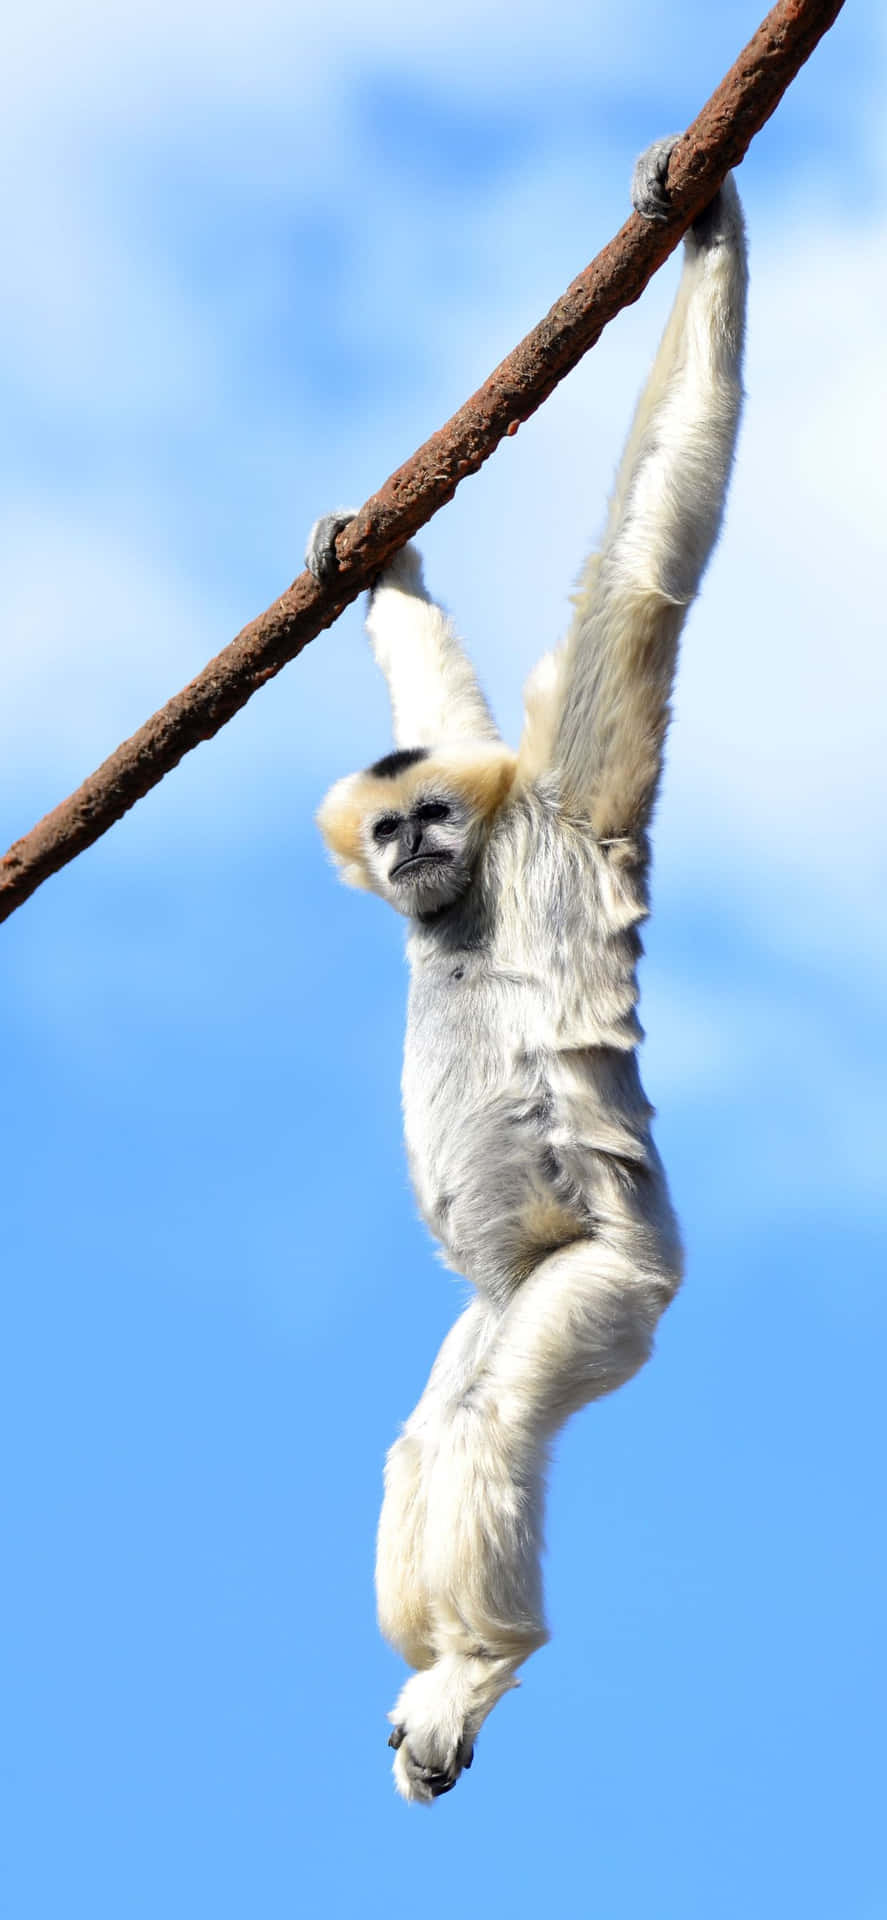 A White Monkey Hanging On A Rope